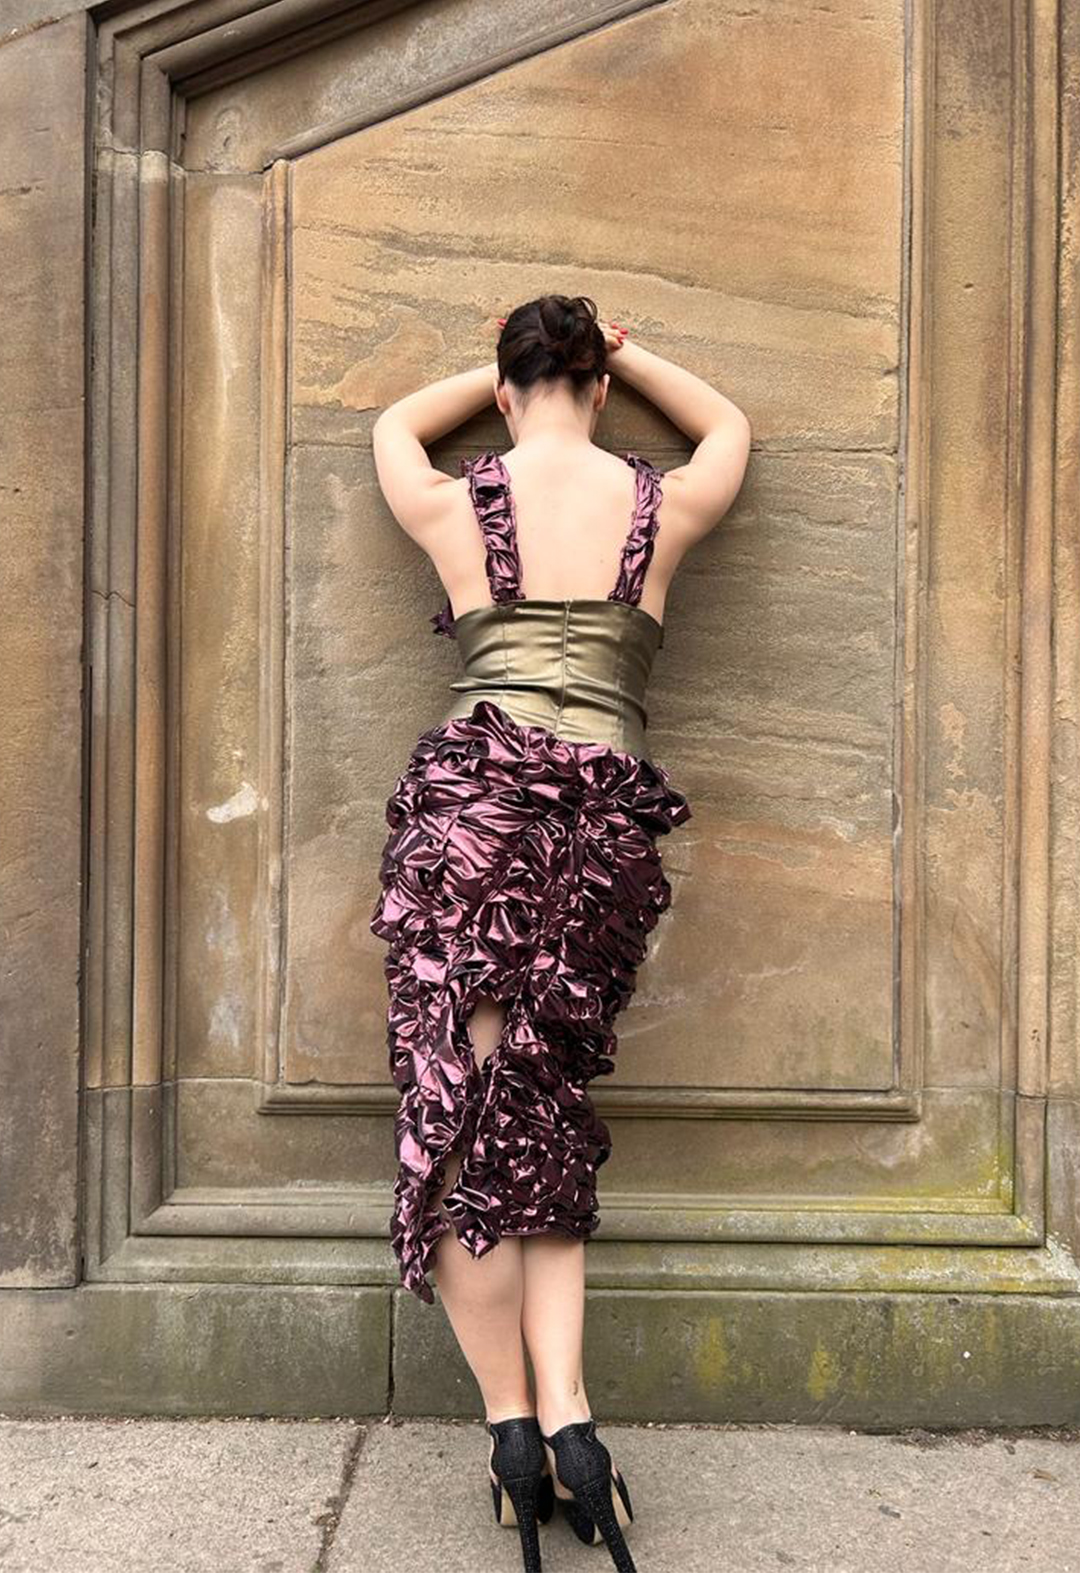 A back view of a girl wearing a long dress and facing an ancient concrete wall. Her hands rest against the wall and come between the wall and her face.